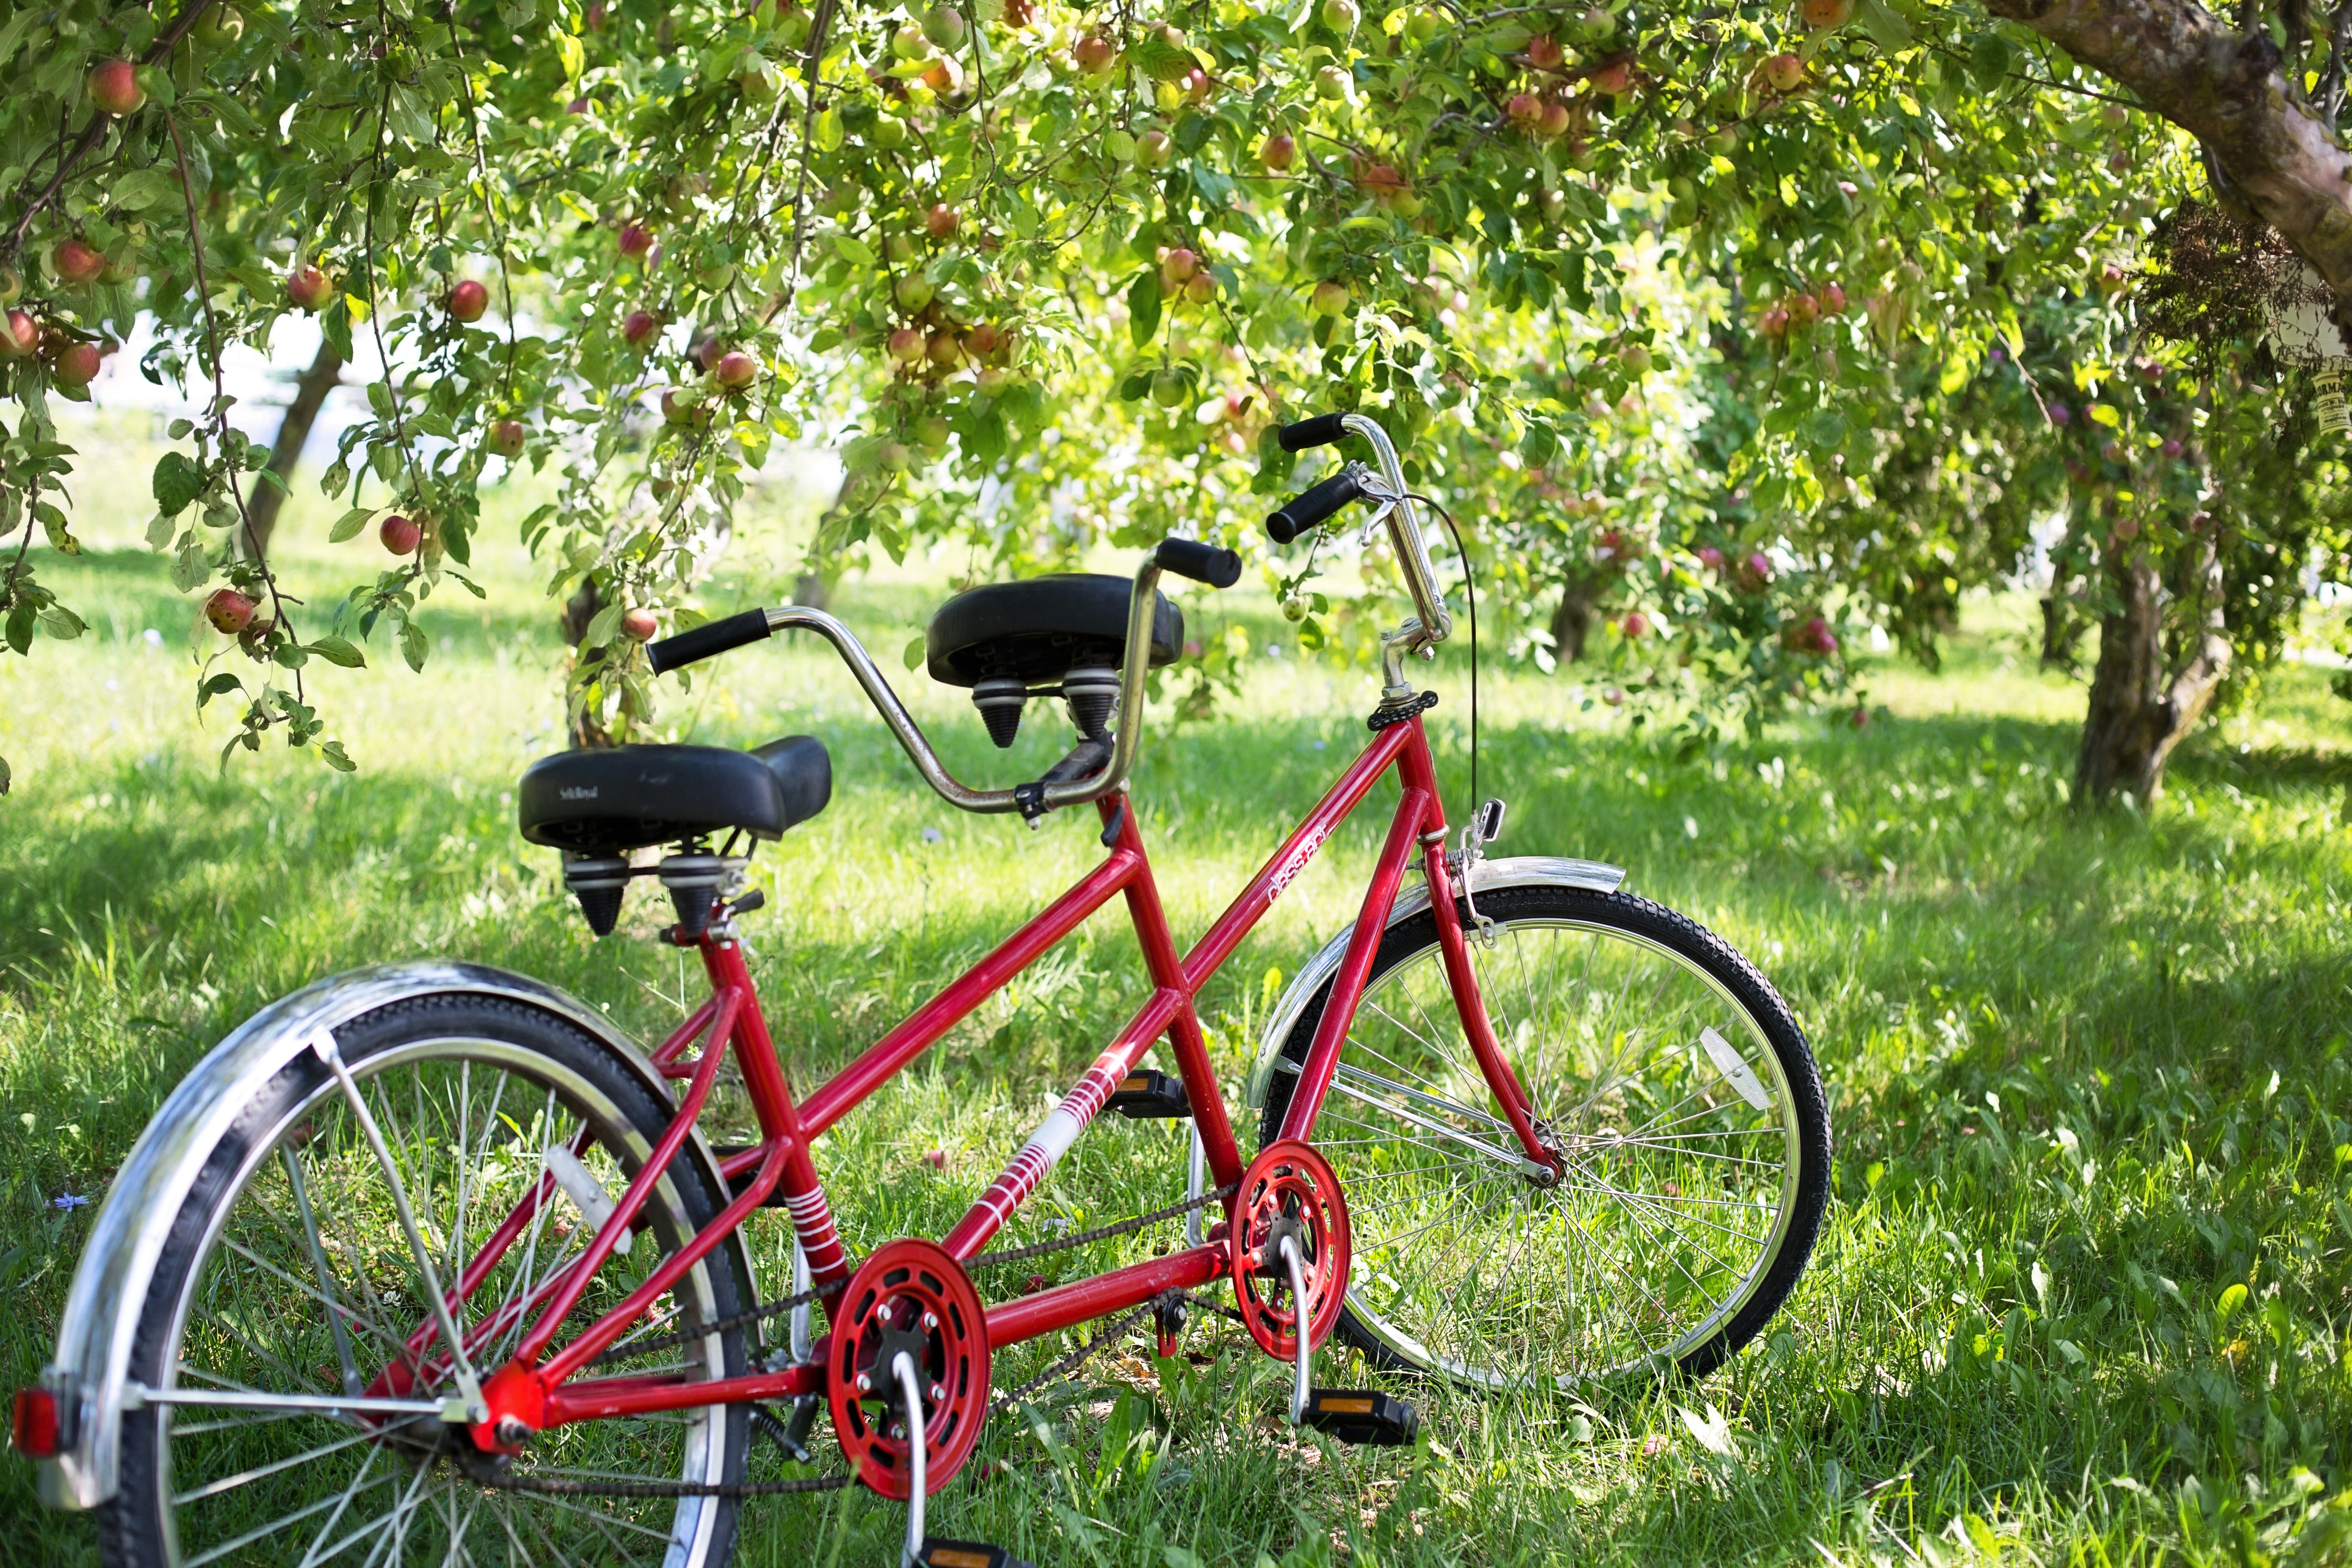 Bicycle, Tandem Bike, Apple Orchard, grass, green color